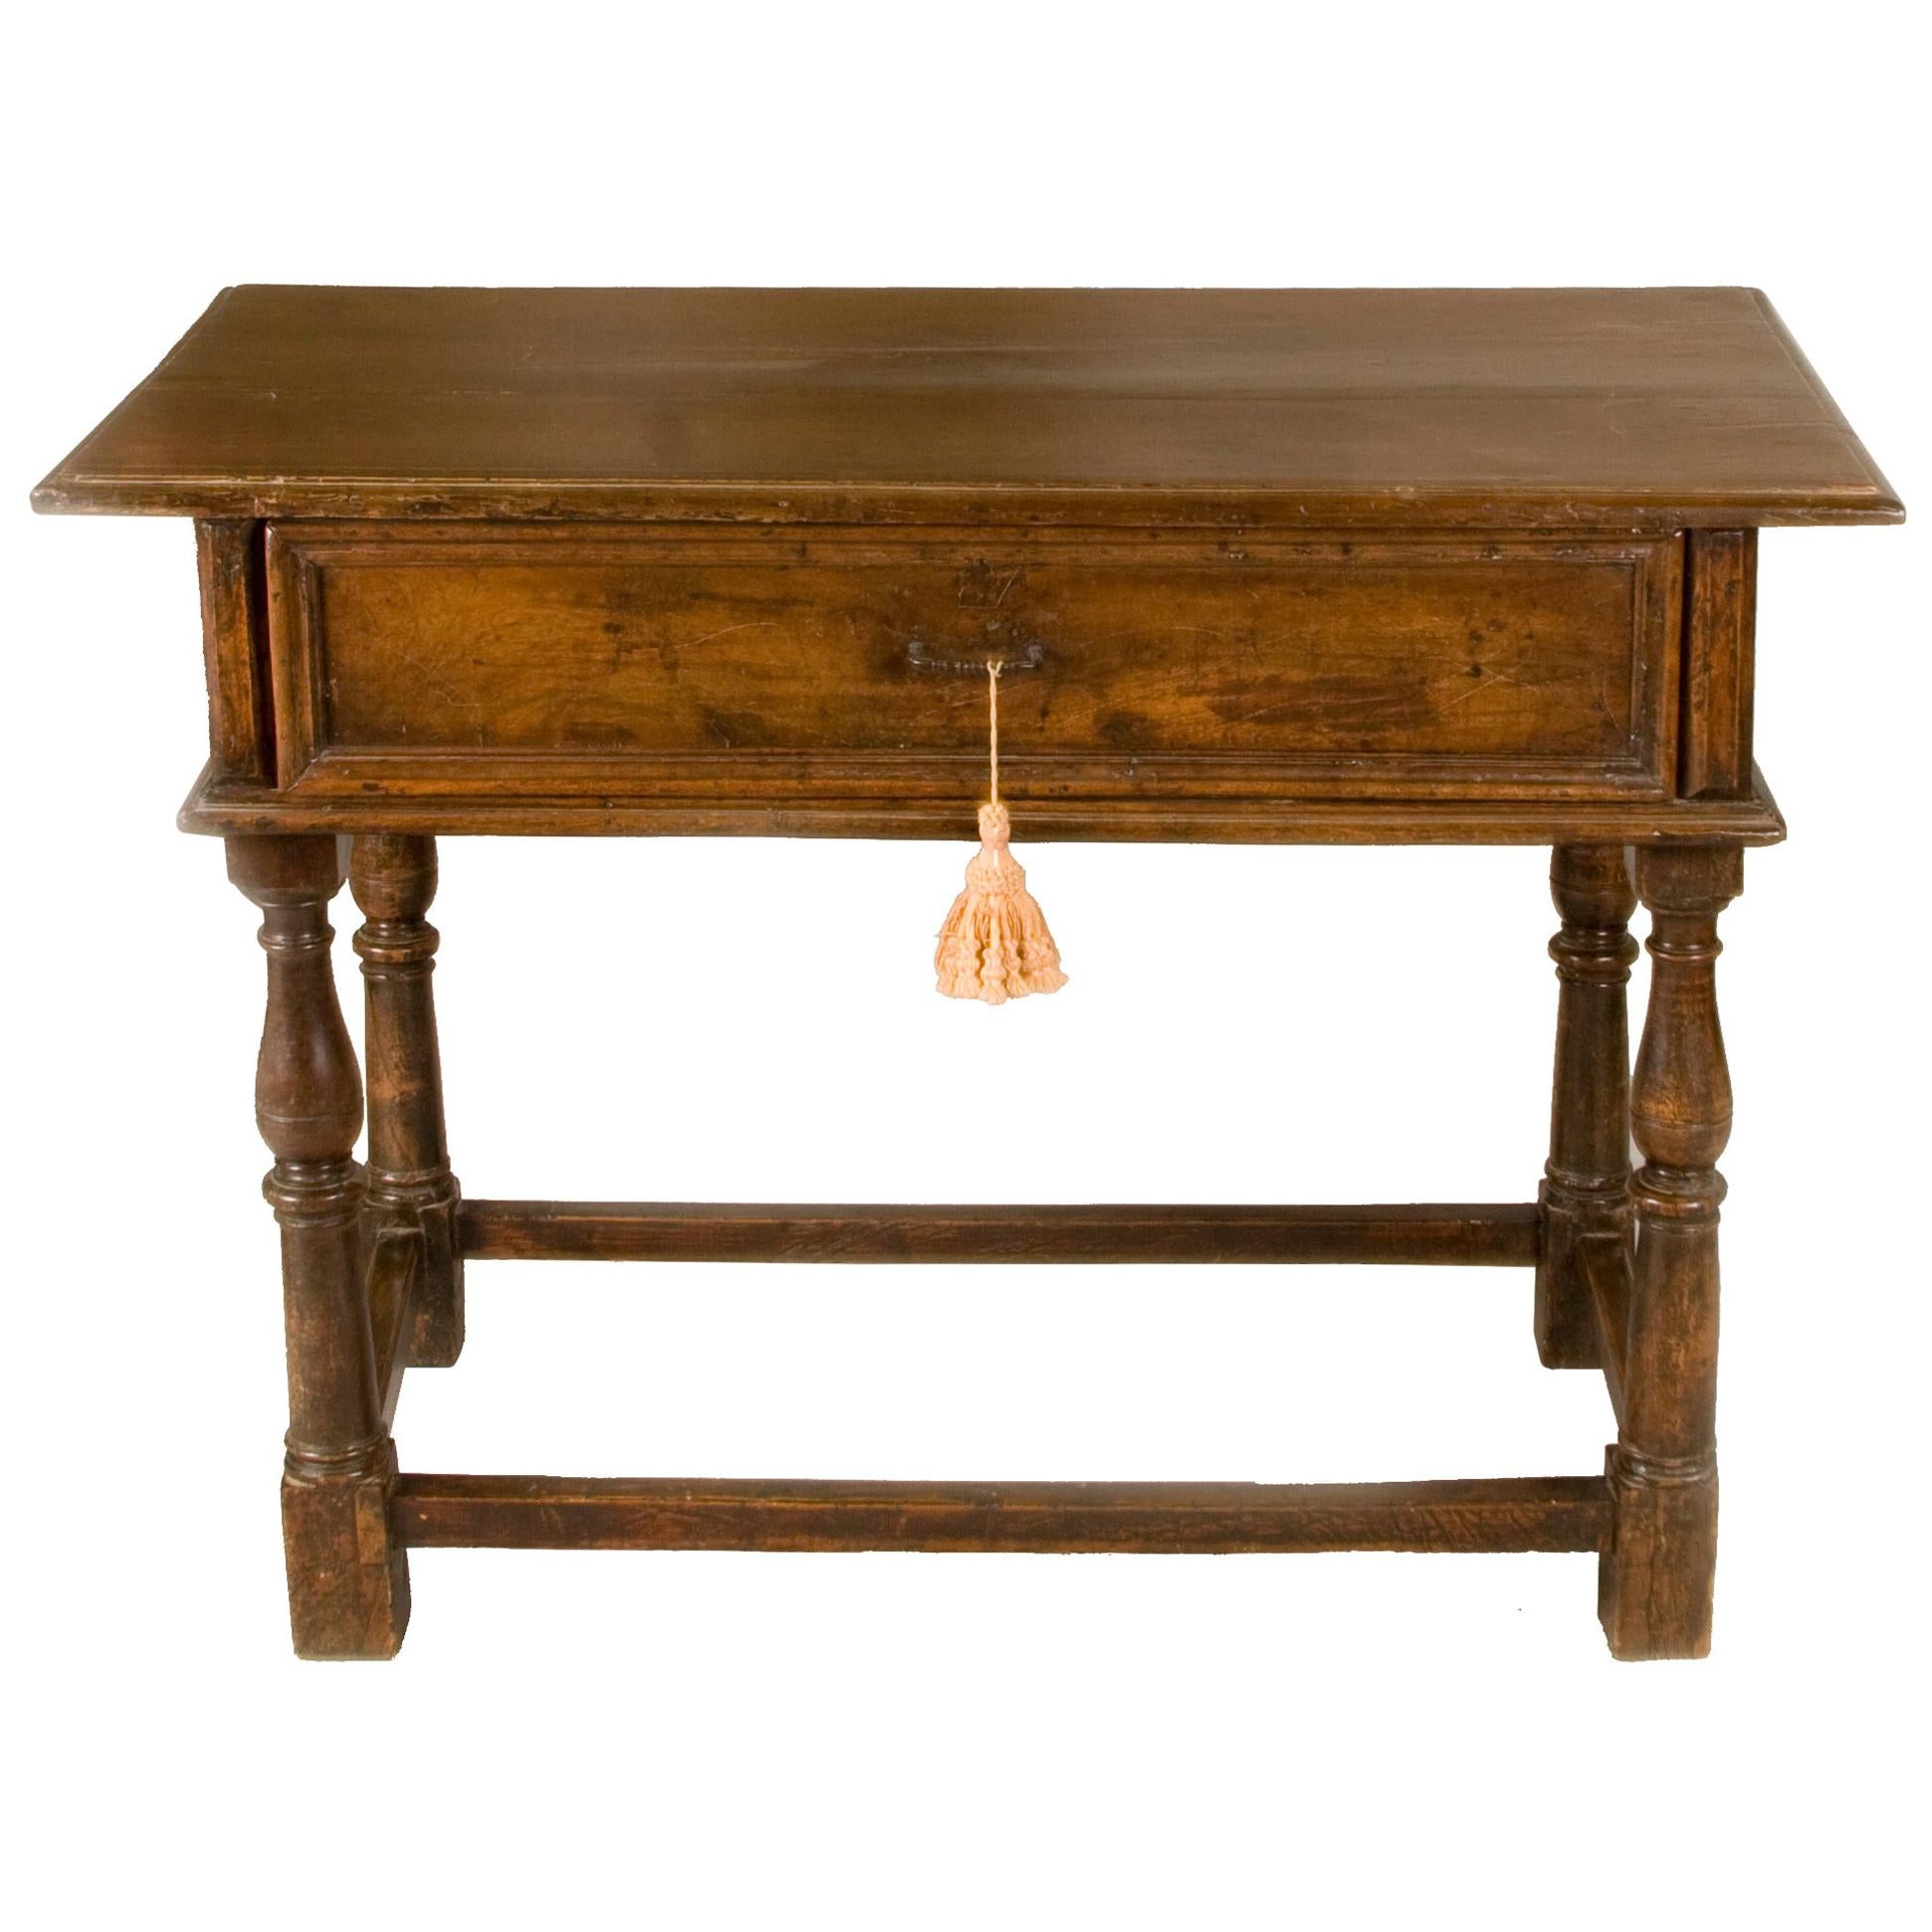 Late 17th-Early 18th Century Italian Table with One Drawer